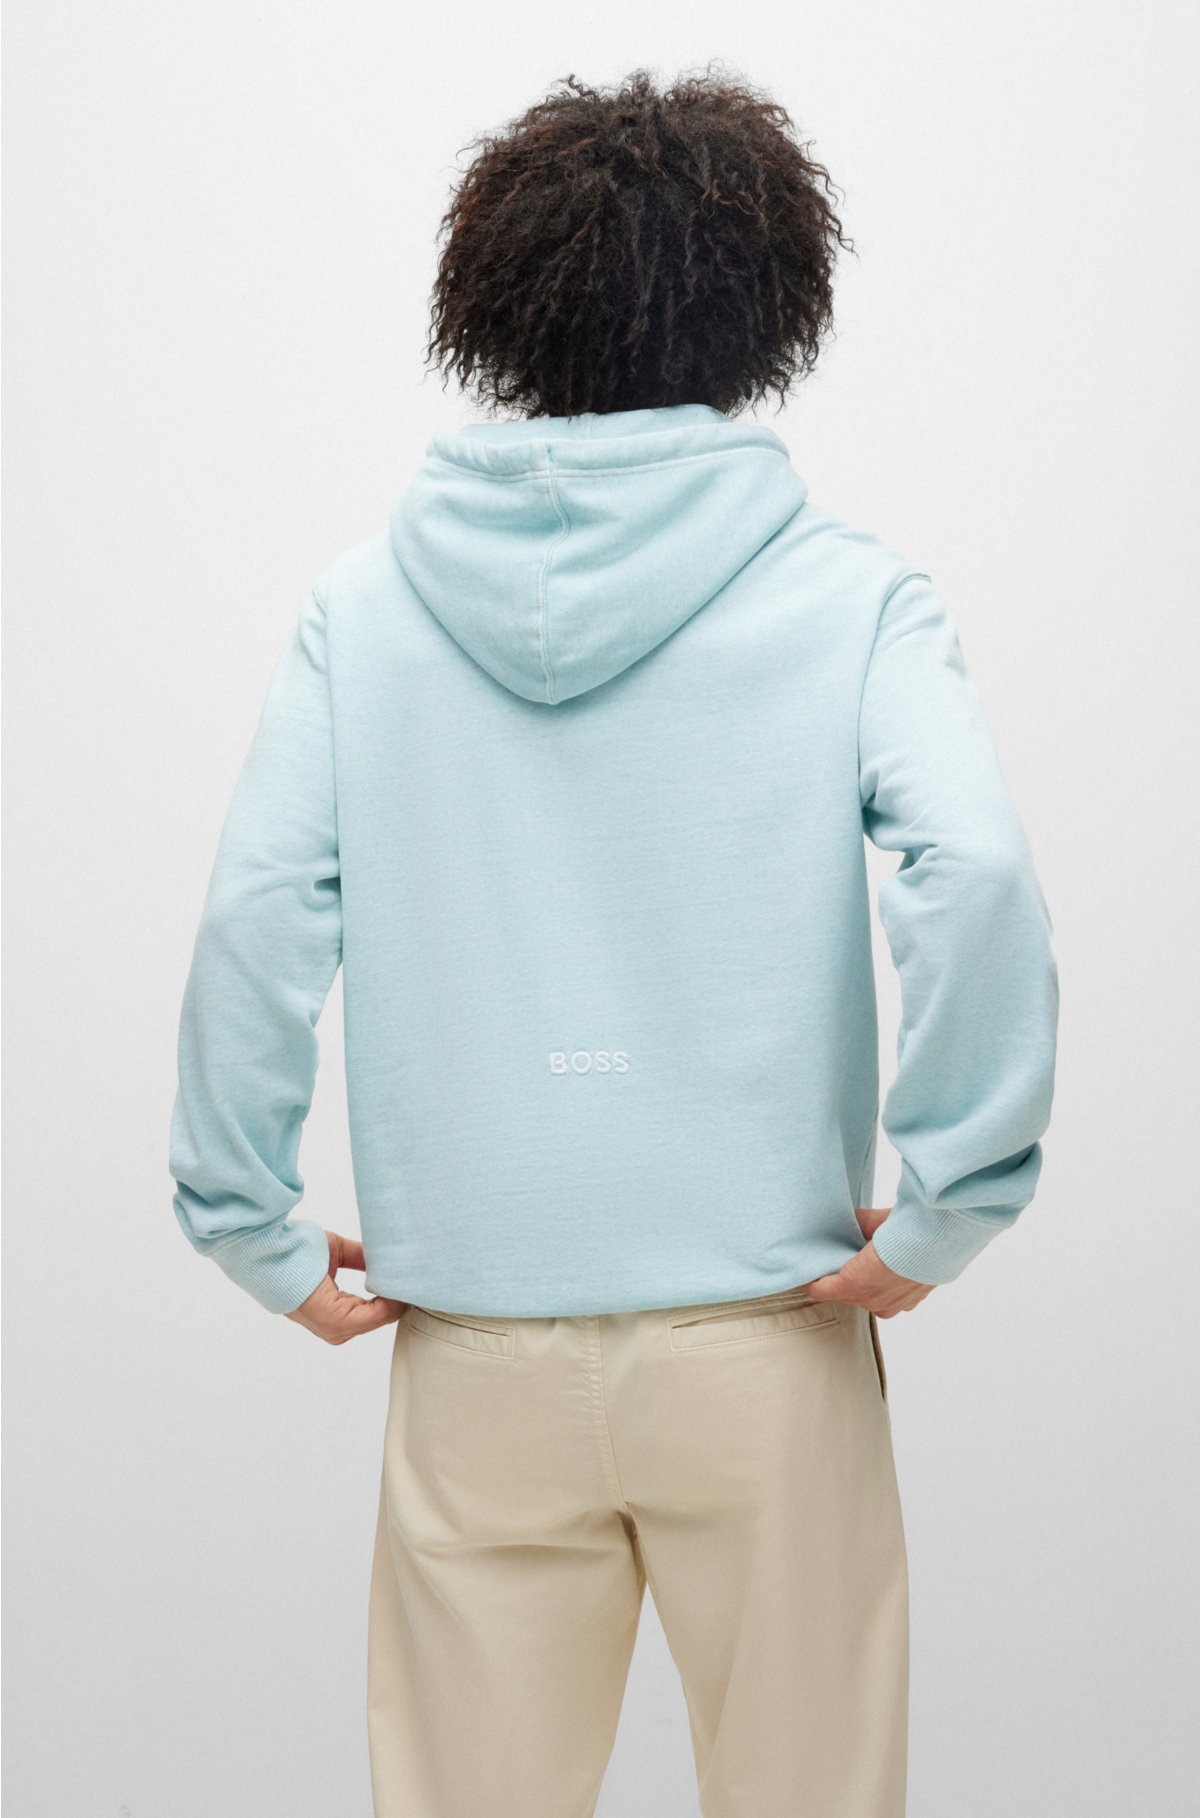 embroidered with relaxed-fit Cotton-blend - logo BOSS hoodie